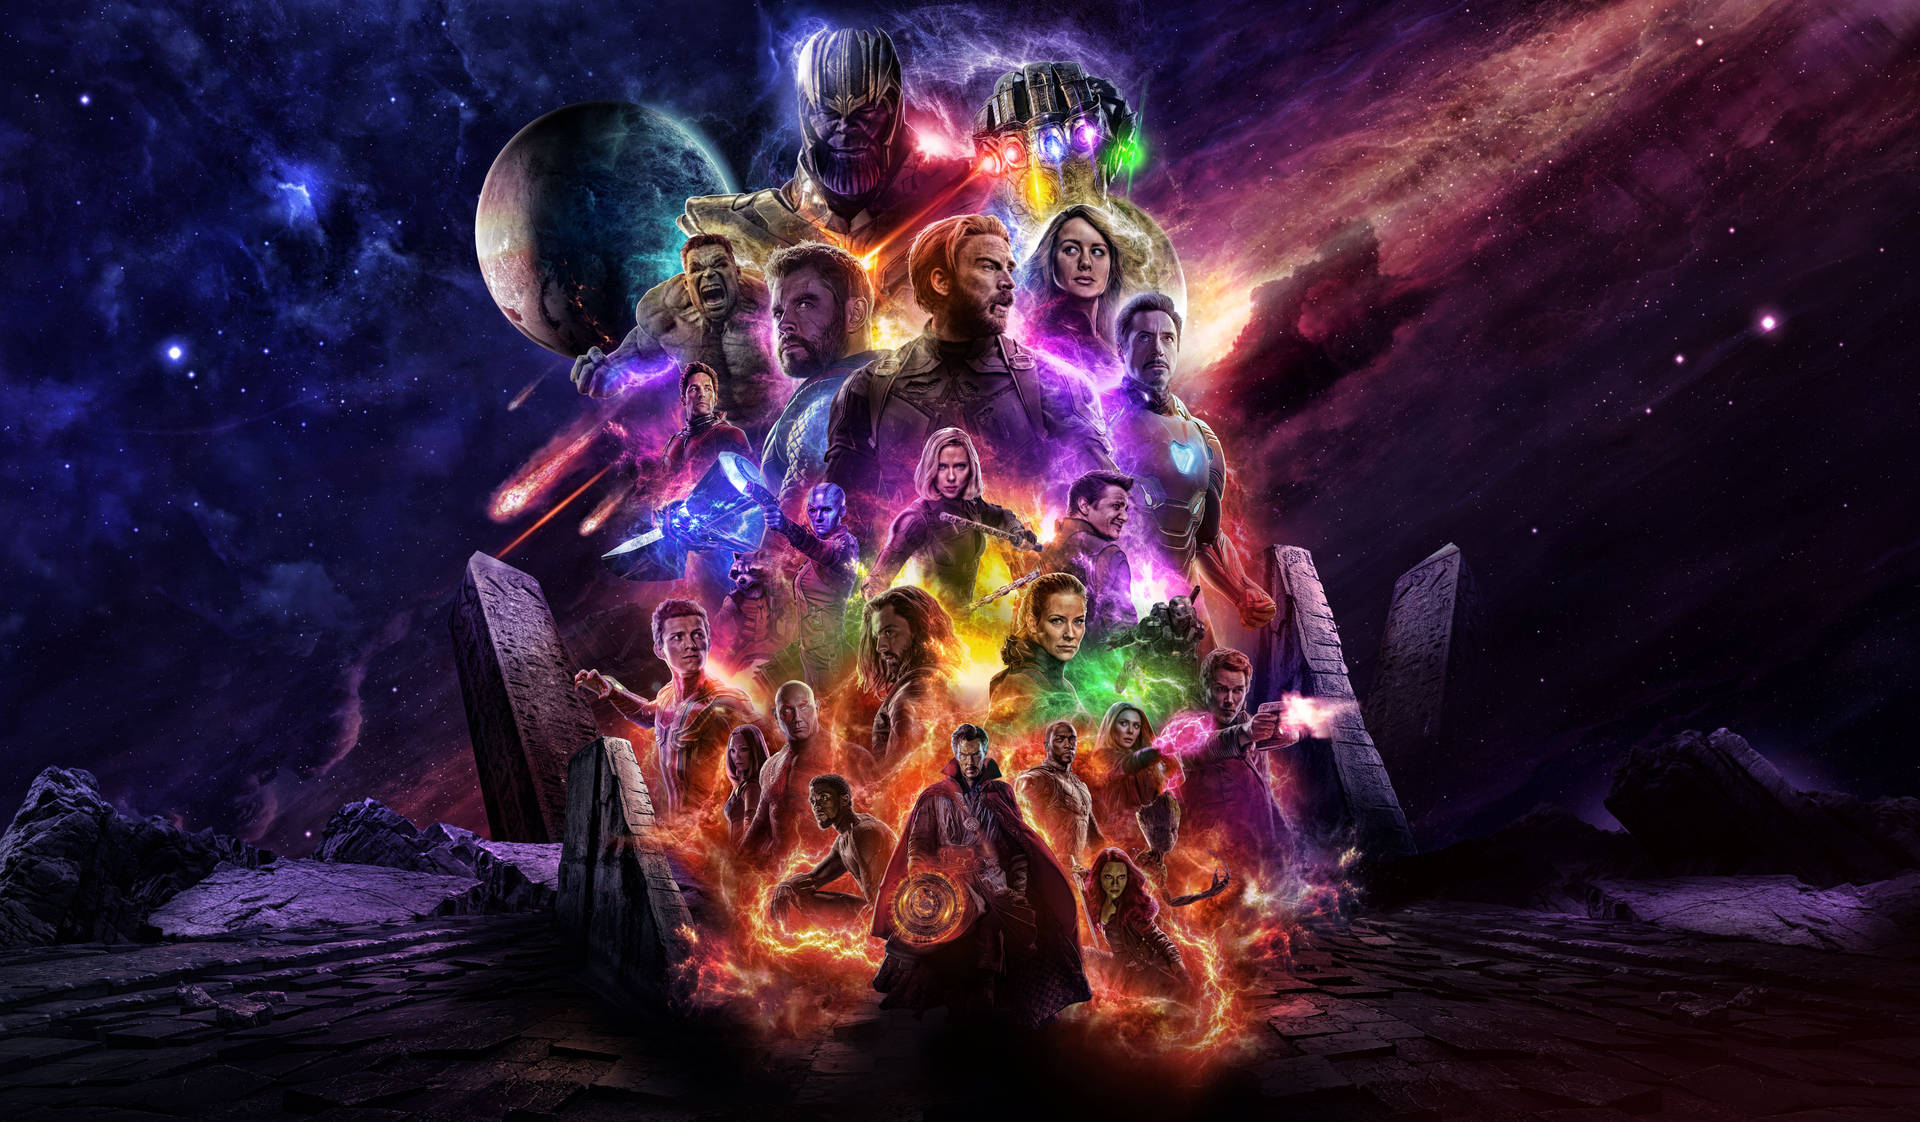 The universe gets a second chance in Avengers: Endgame Wallpaper